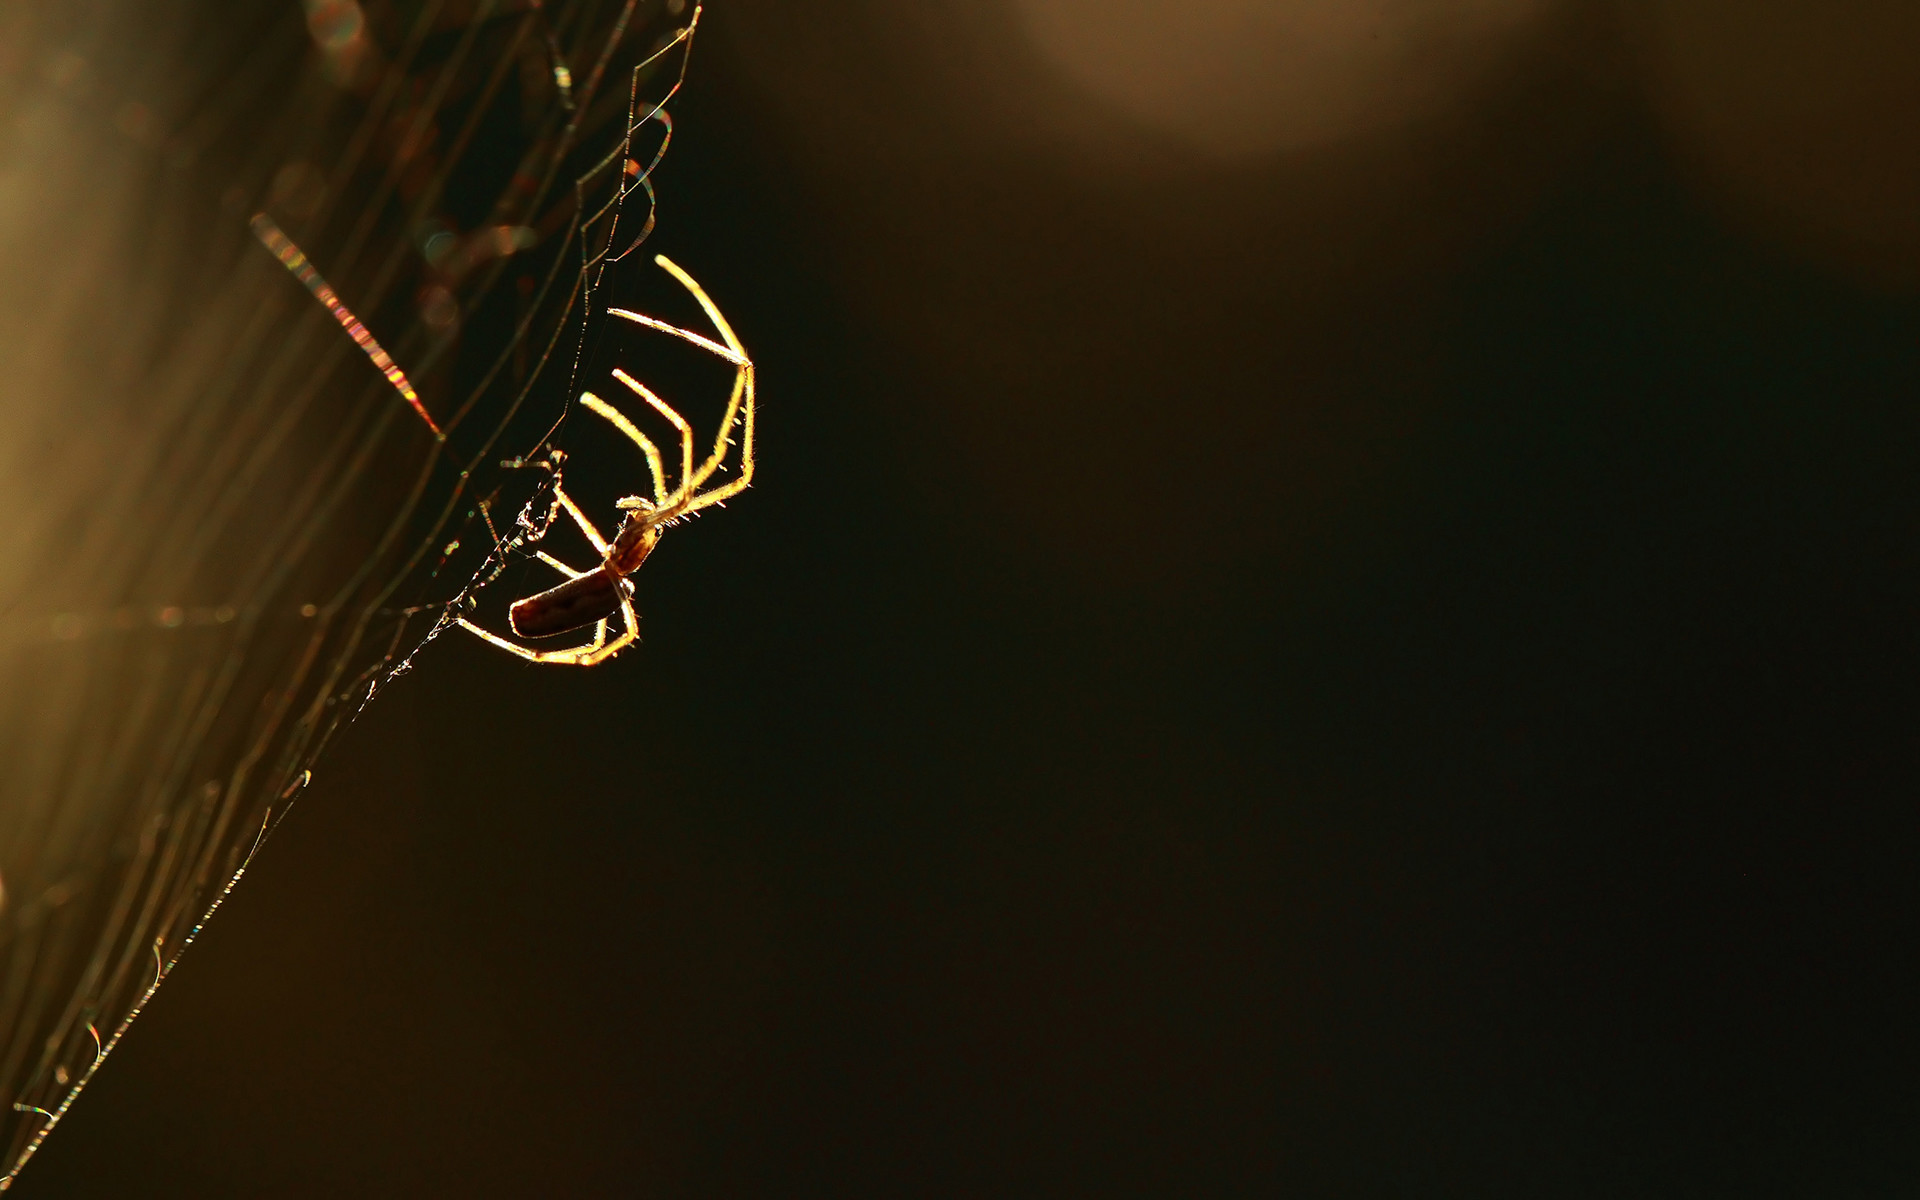 1920x1200 Wallpapers for Spider Web Pictures â Resolution 